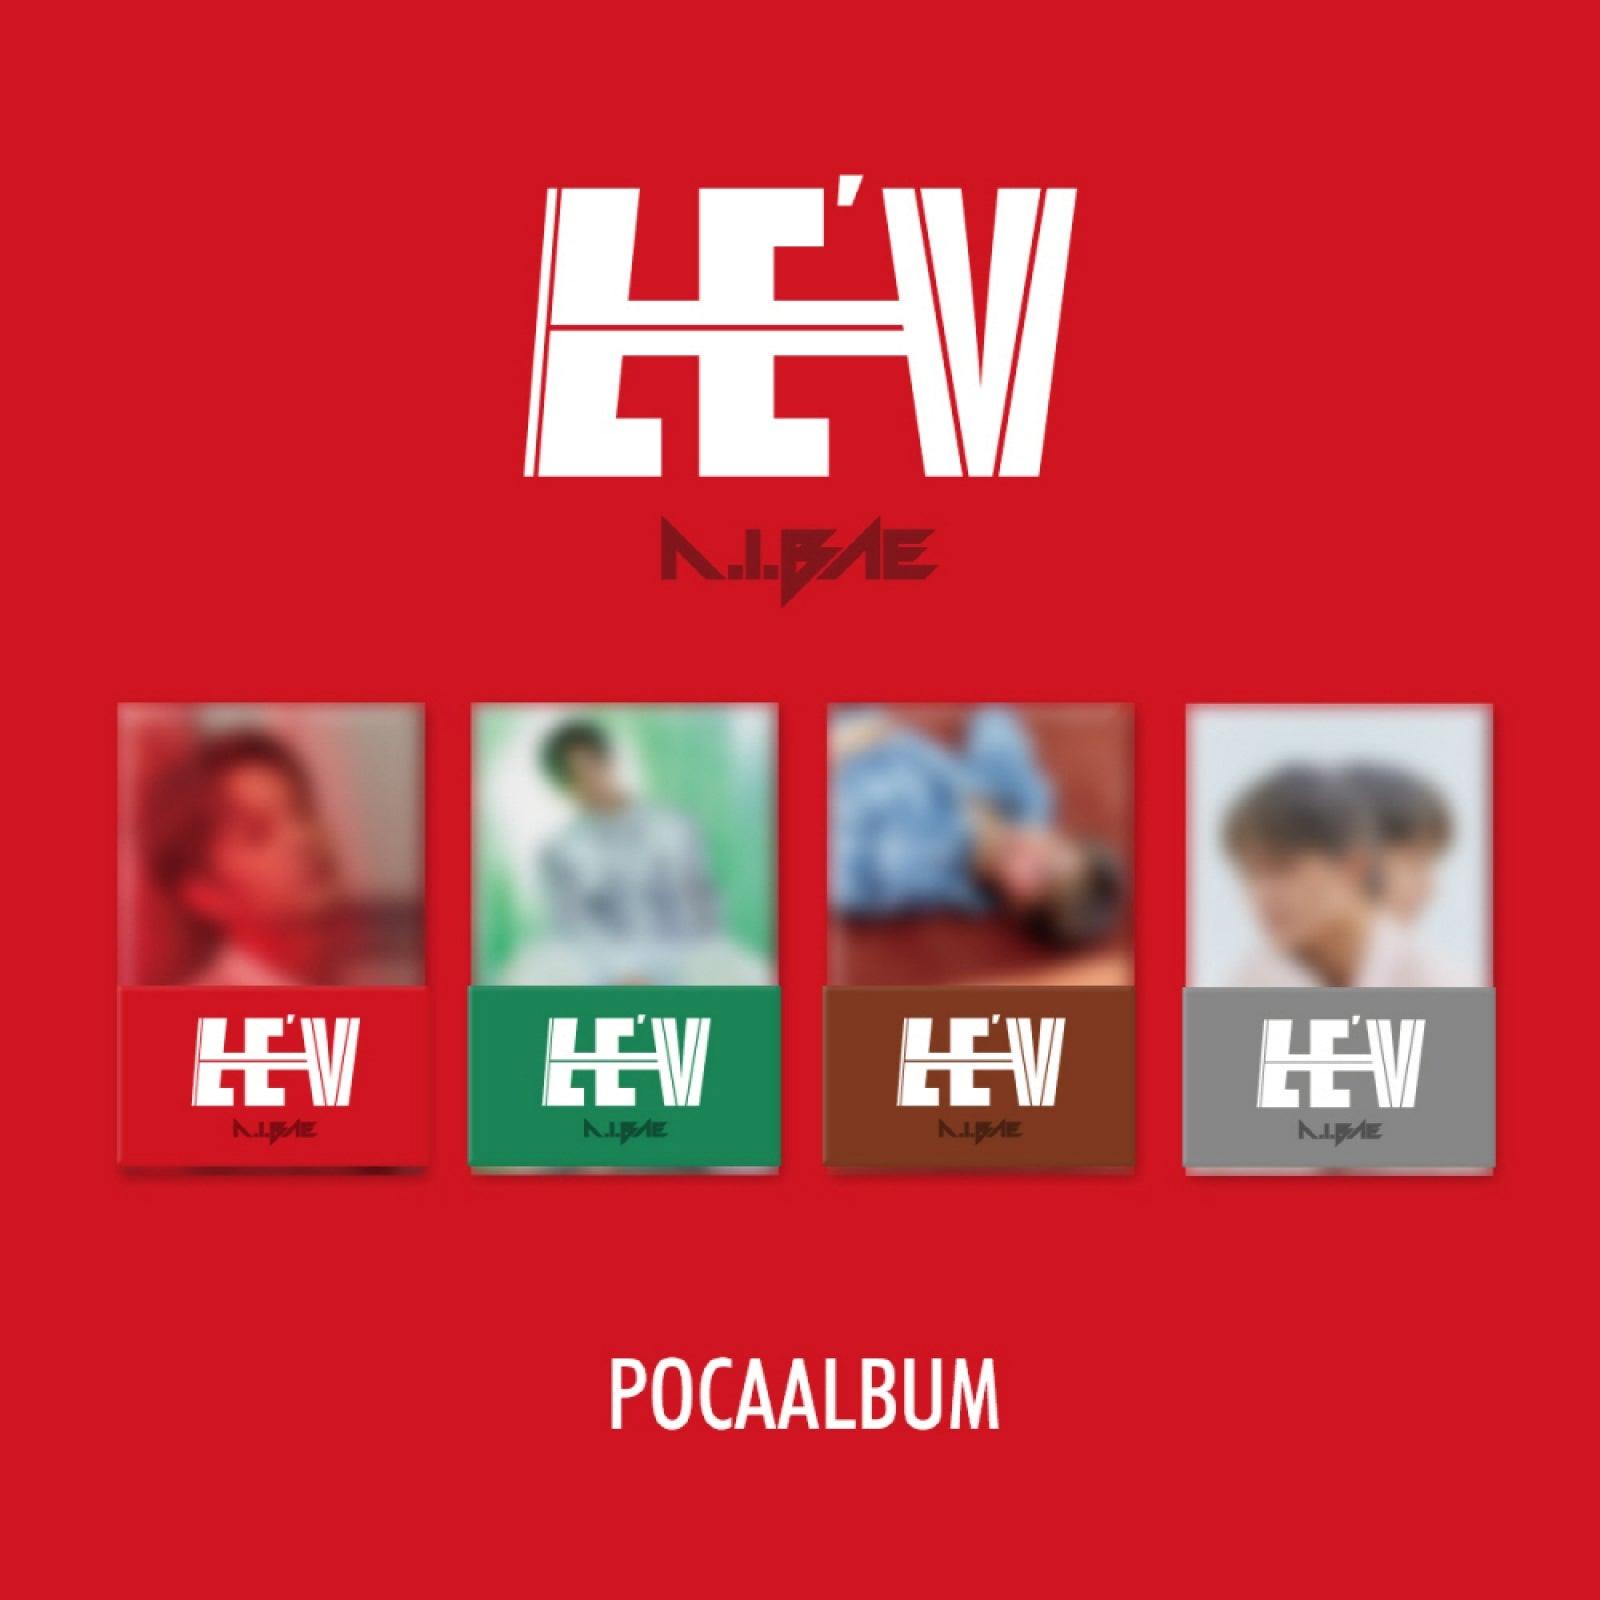 [PRE-ORDER] LE’V - A.I.BAE / 1ST EP ALBUM - Shopping Around the World with Goodsnjoy